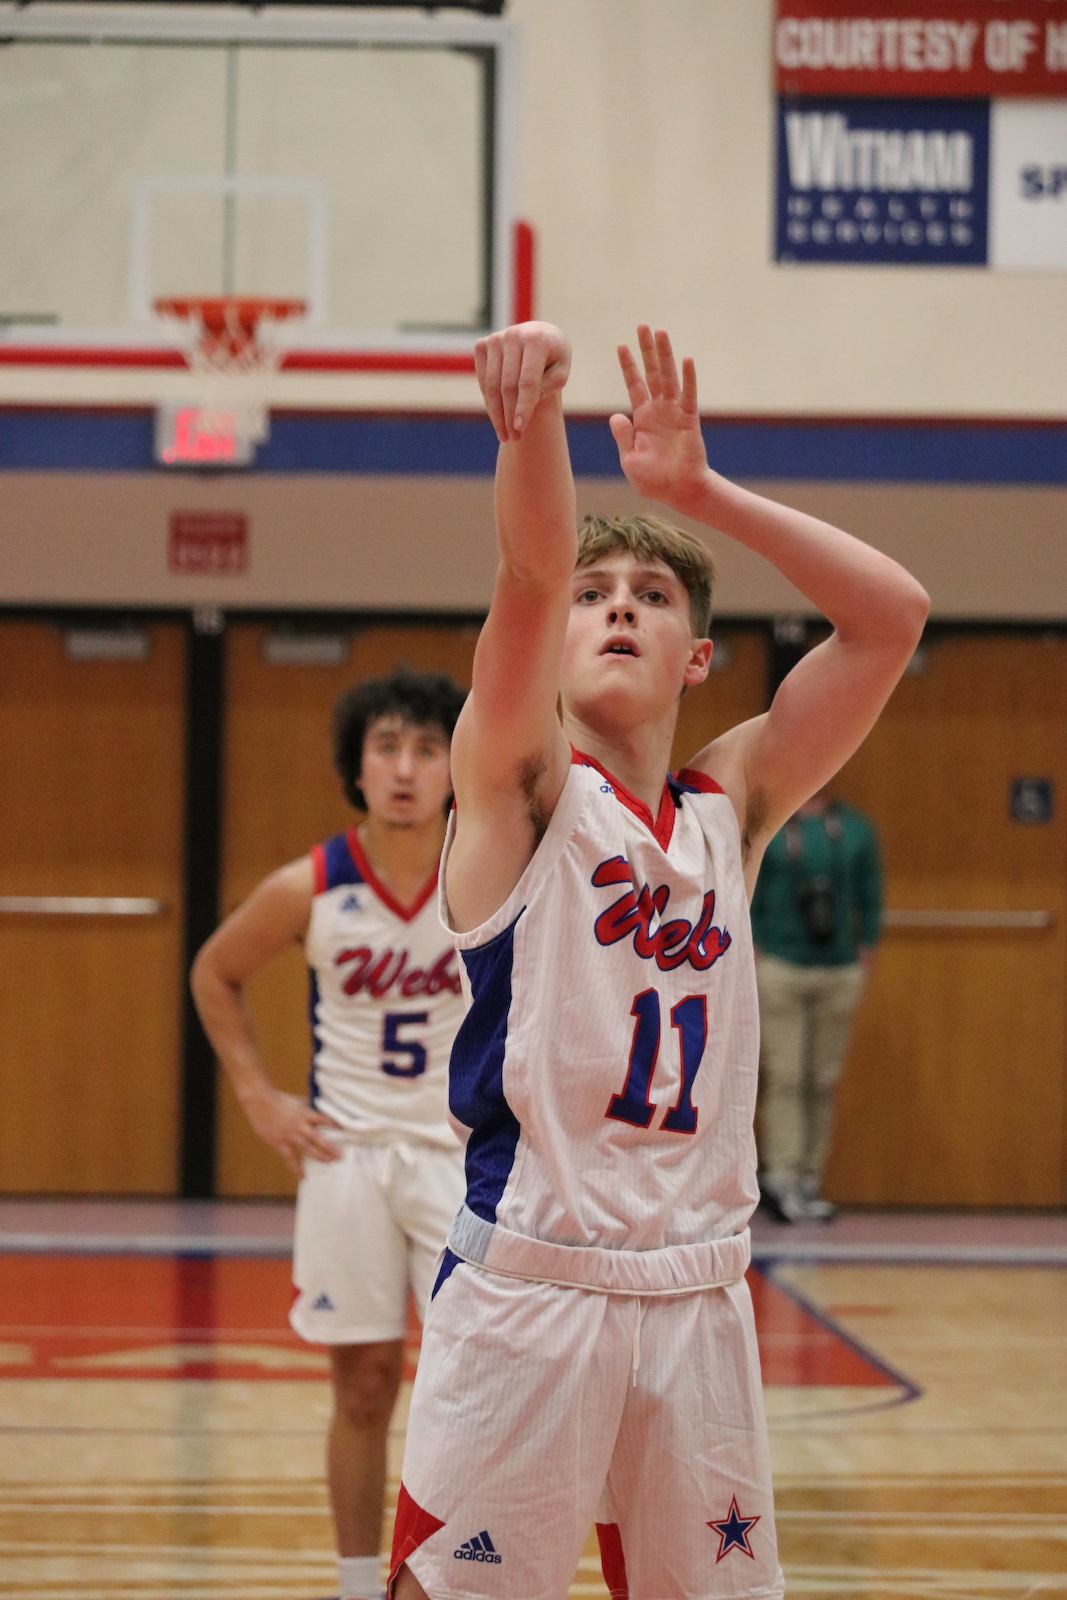 On Tuesday night The Western Boone Boys Basketball team hosted Covington and finished 1-1 on the night. cover photo